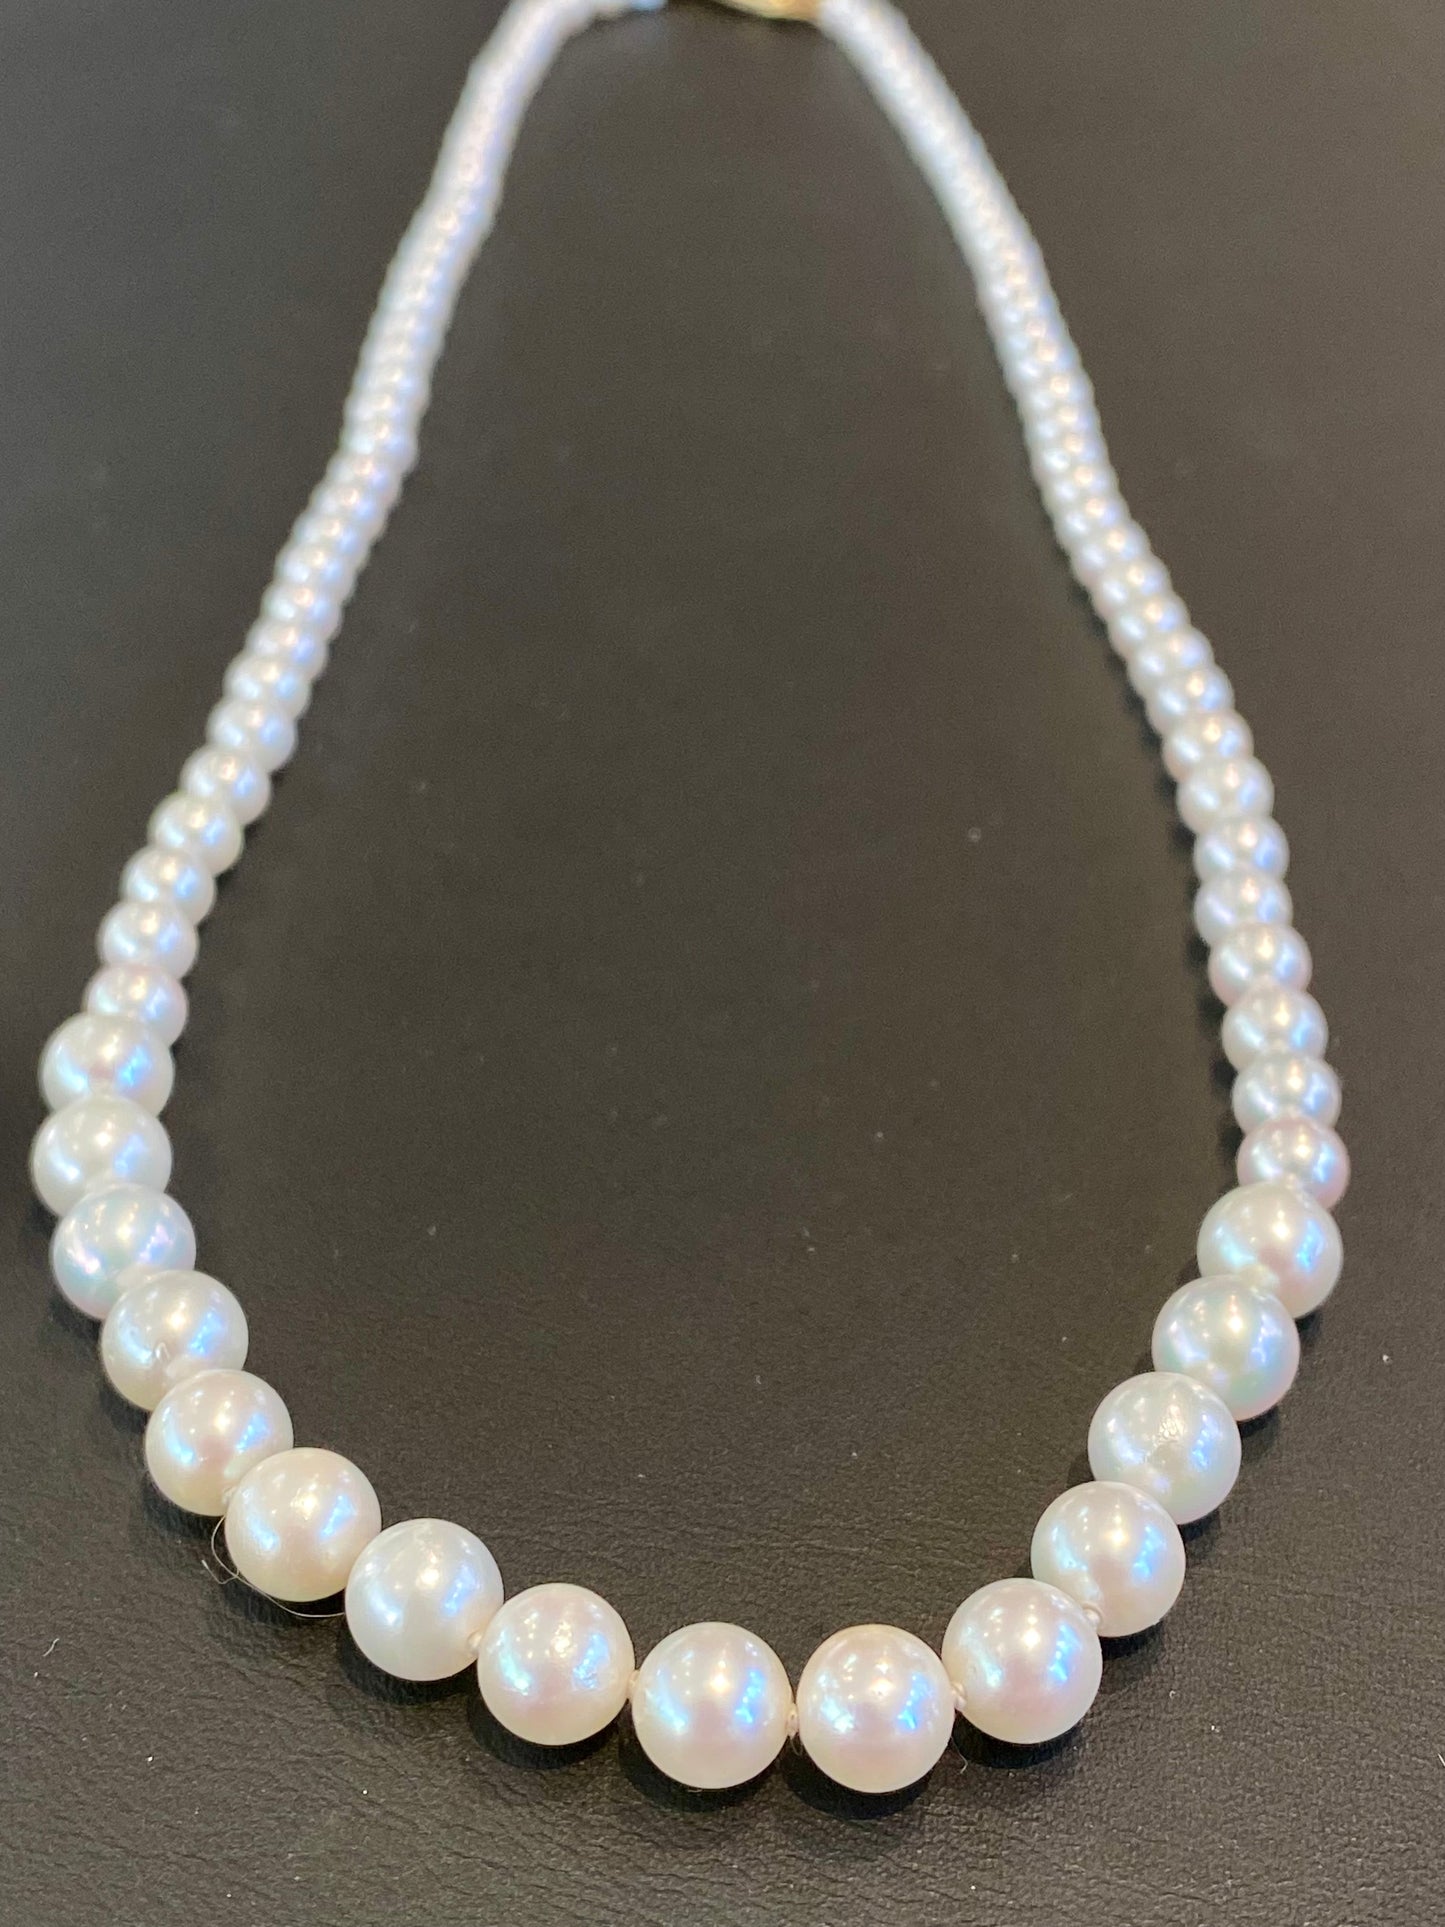 14KY GRADUATED AKOYA PEARL NECKLACE